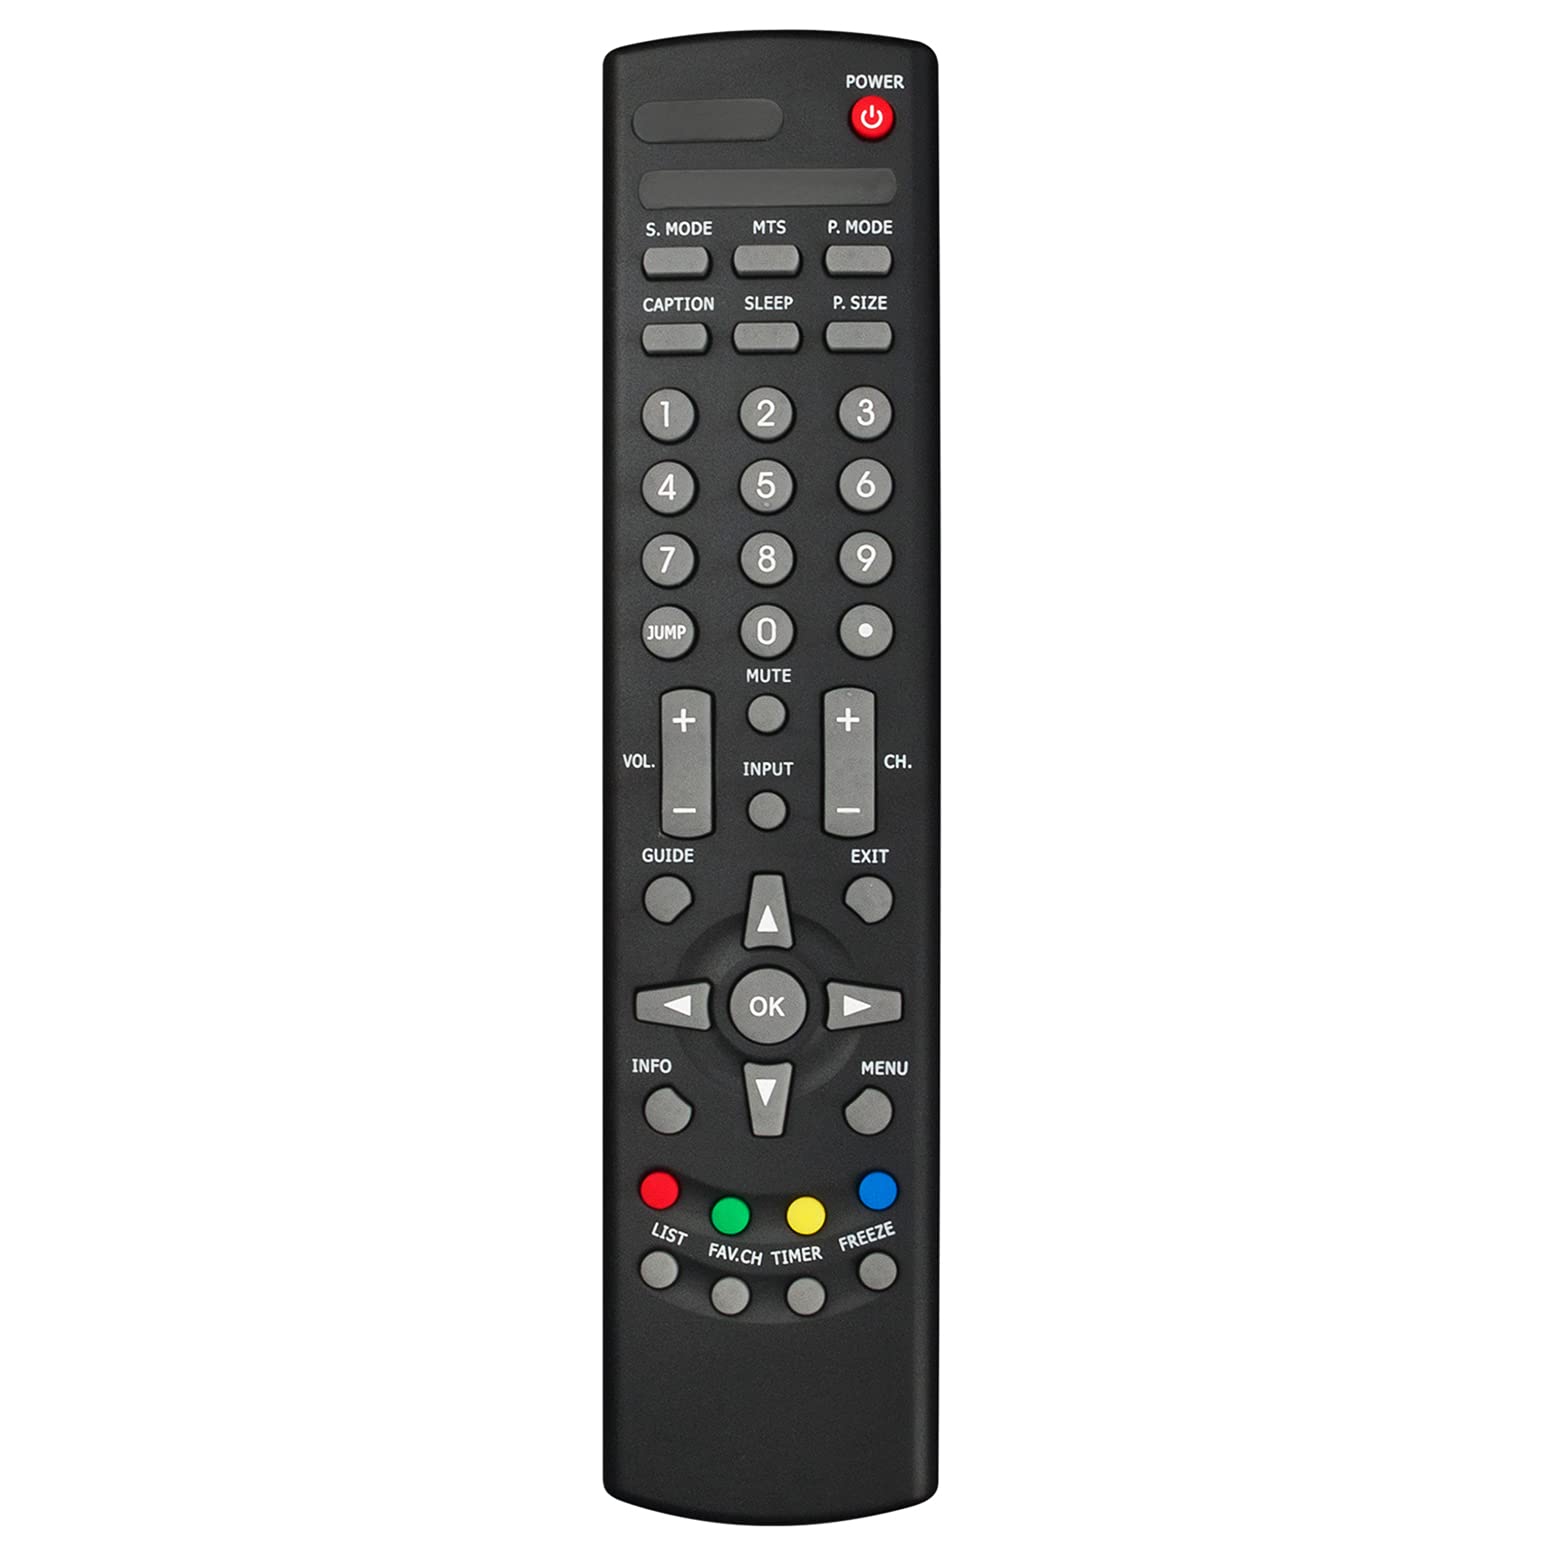 Power Cycle the Polaroid TV Remote